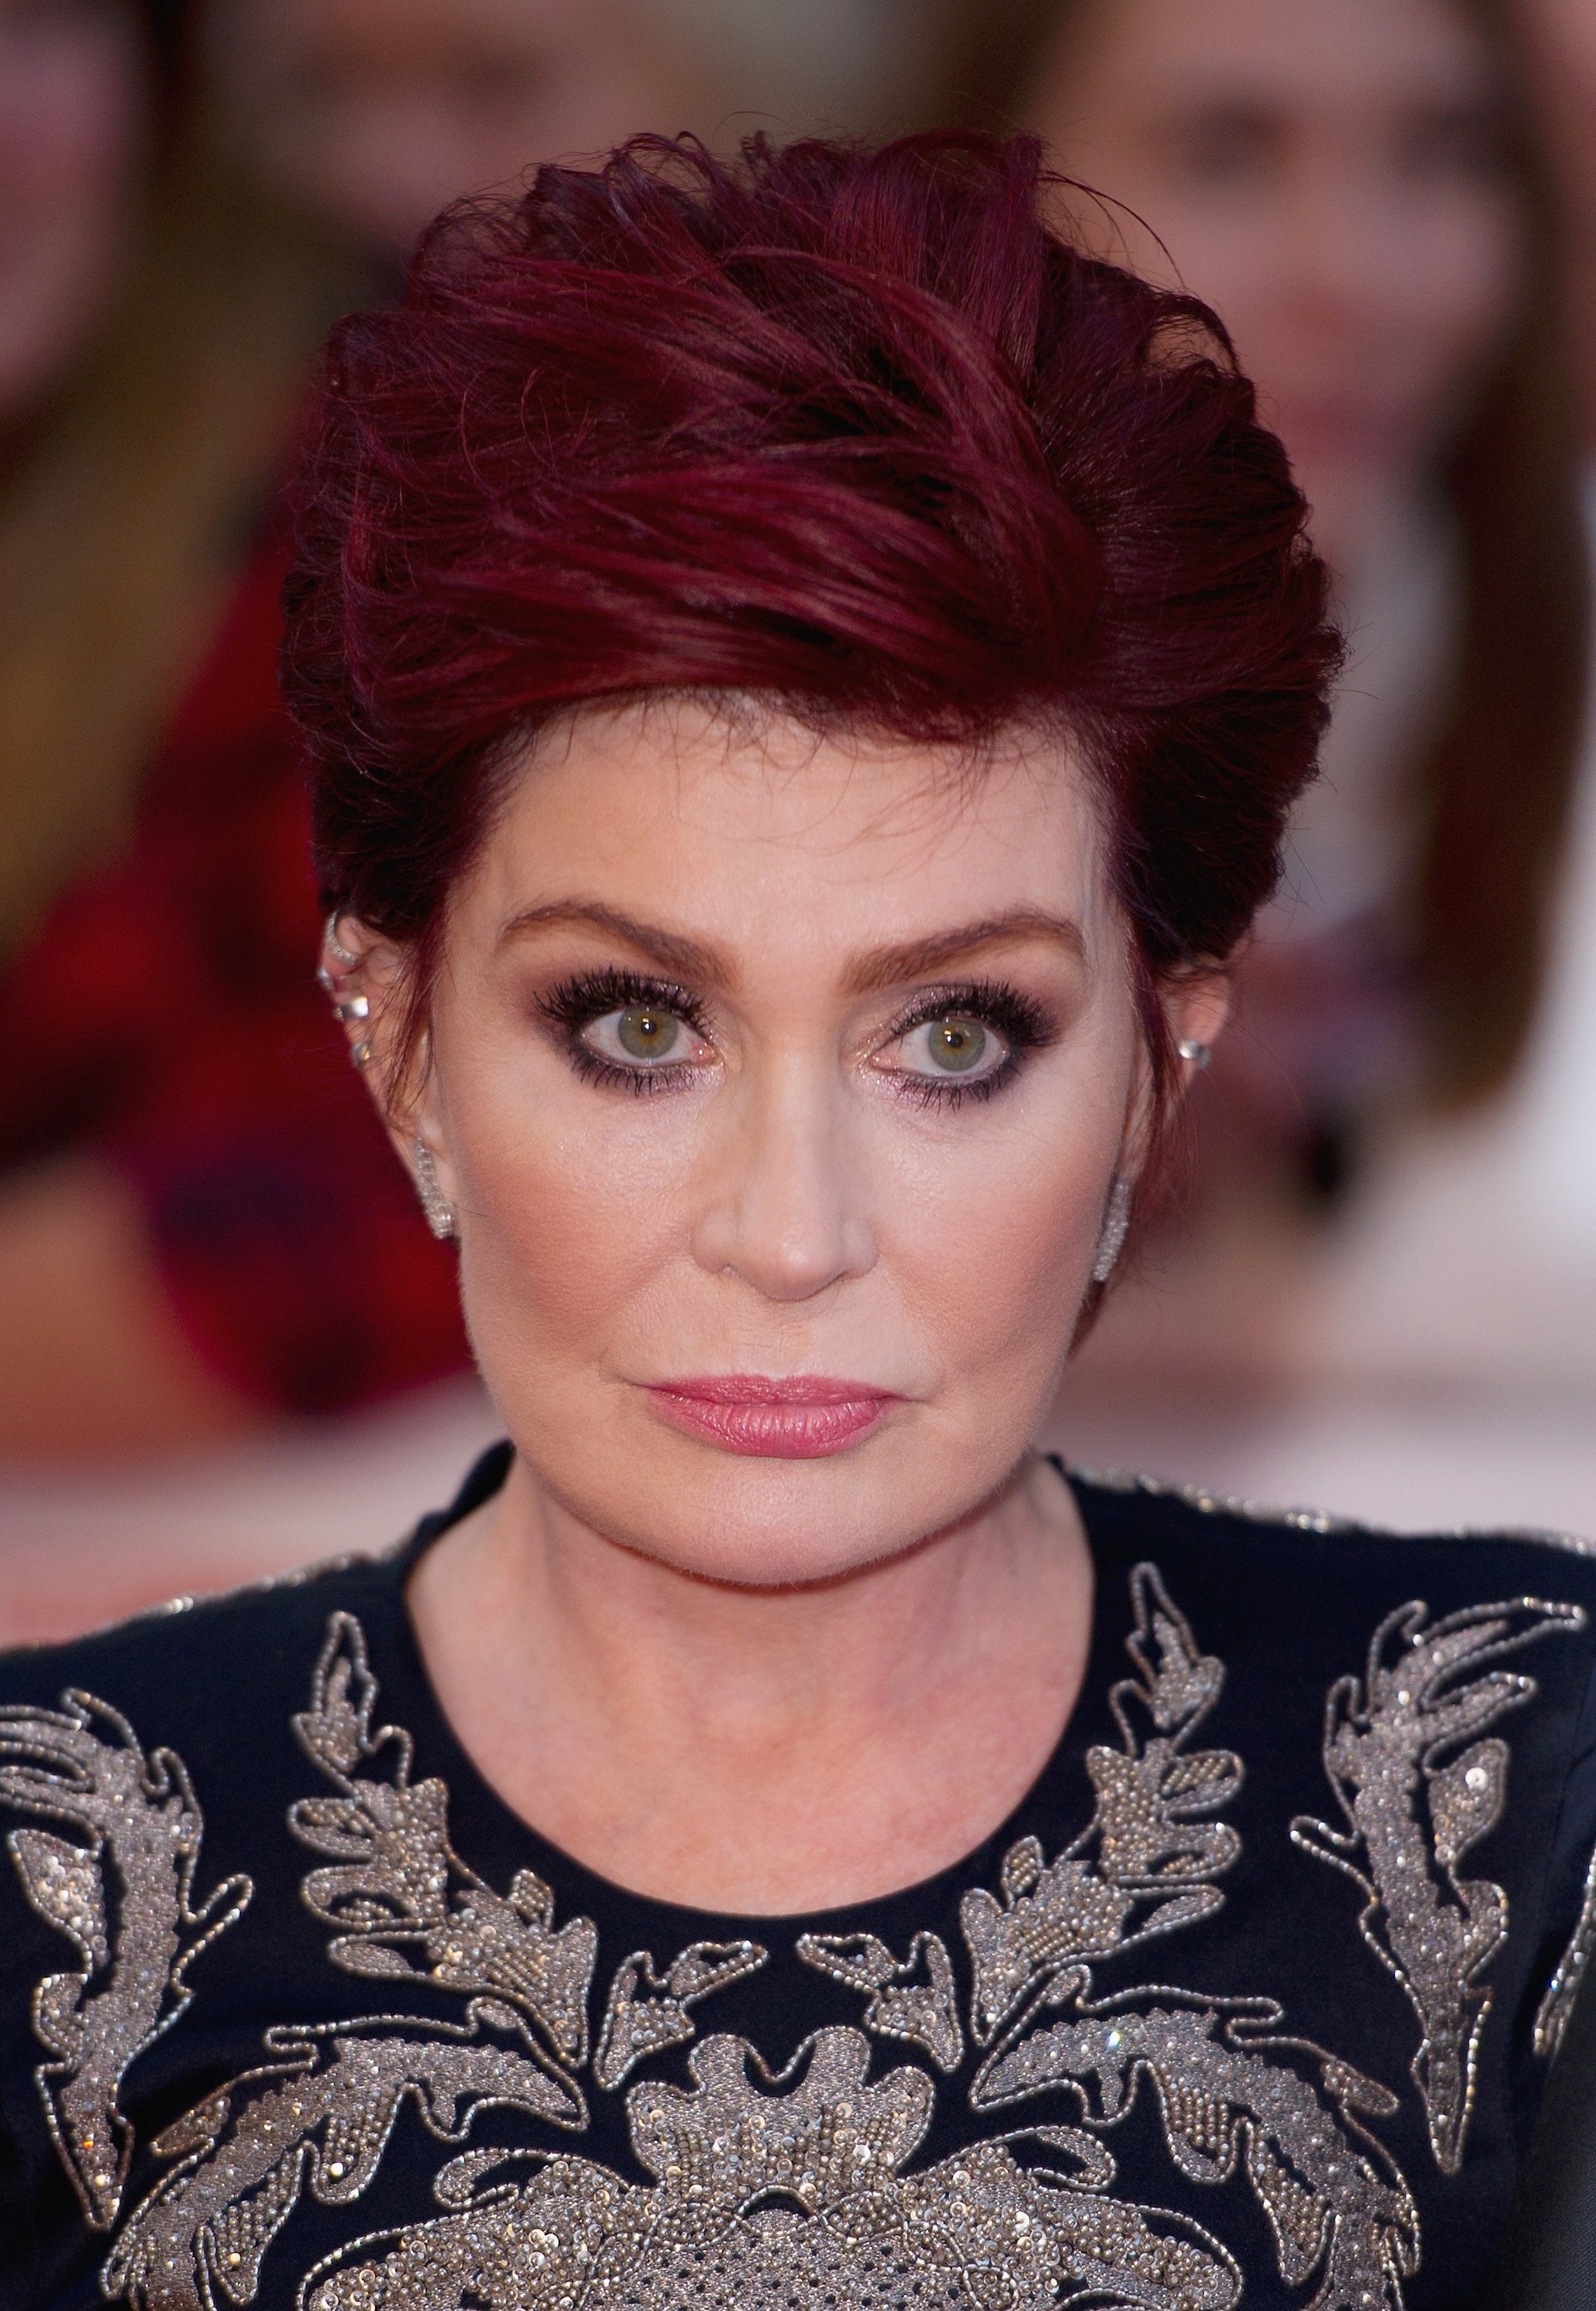 Sharon Osbourne at the Pride of Britain awards on September 28, 2015 | Photo: GettyImages